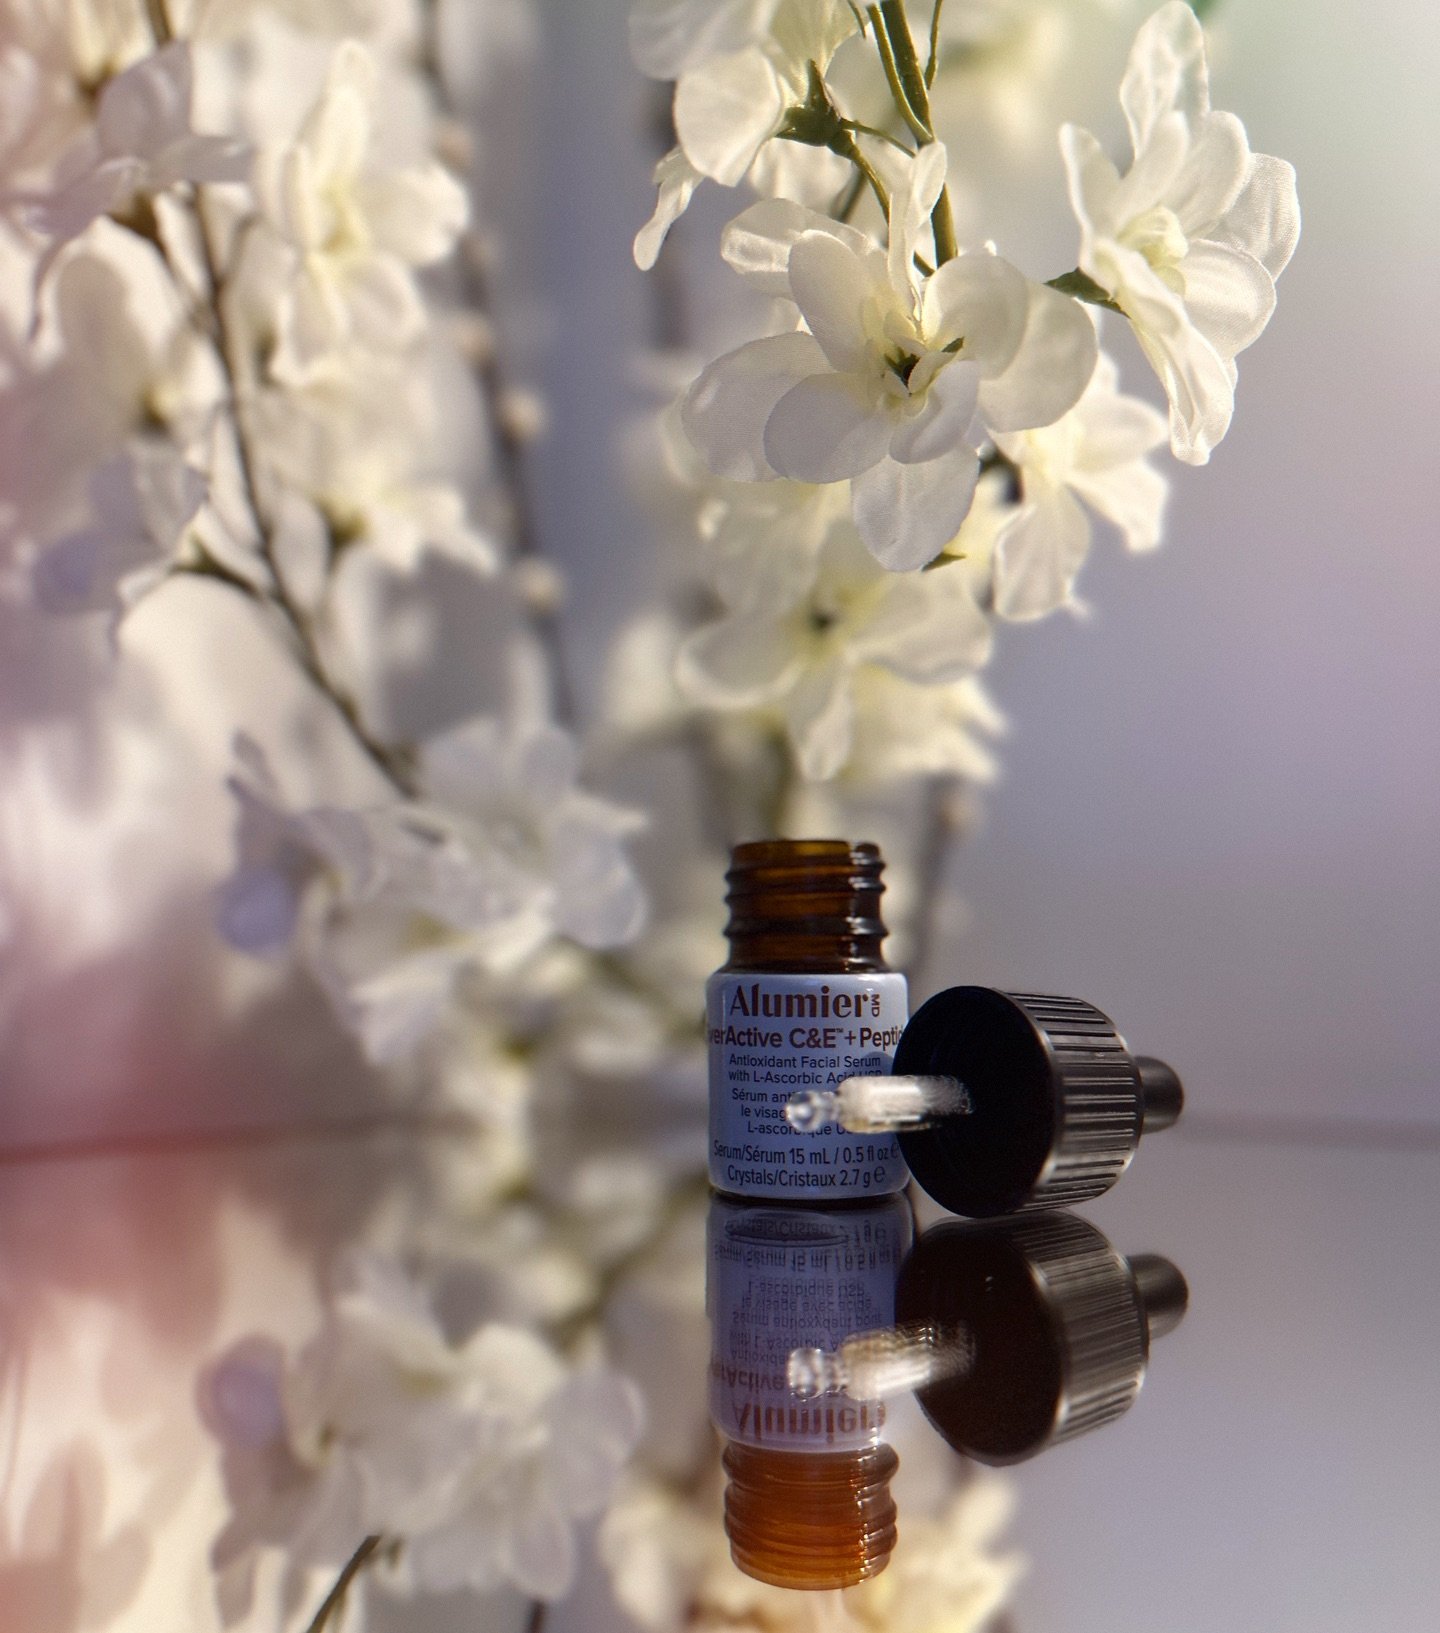 ✨ Product spotlight: Everactive C&amp;E + Peptide ✨ The key to a beautiful complexion is in this little bottle of liquid gold ✨

✨ Award winning, high strength serum 
🌷 Reduces the appearance of fine lines
✨ Brightens dull complexions 
🌷 Dye, parab